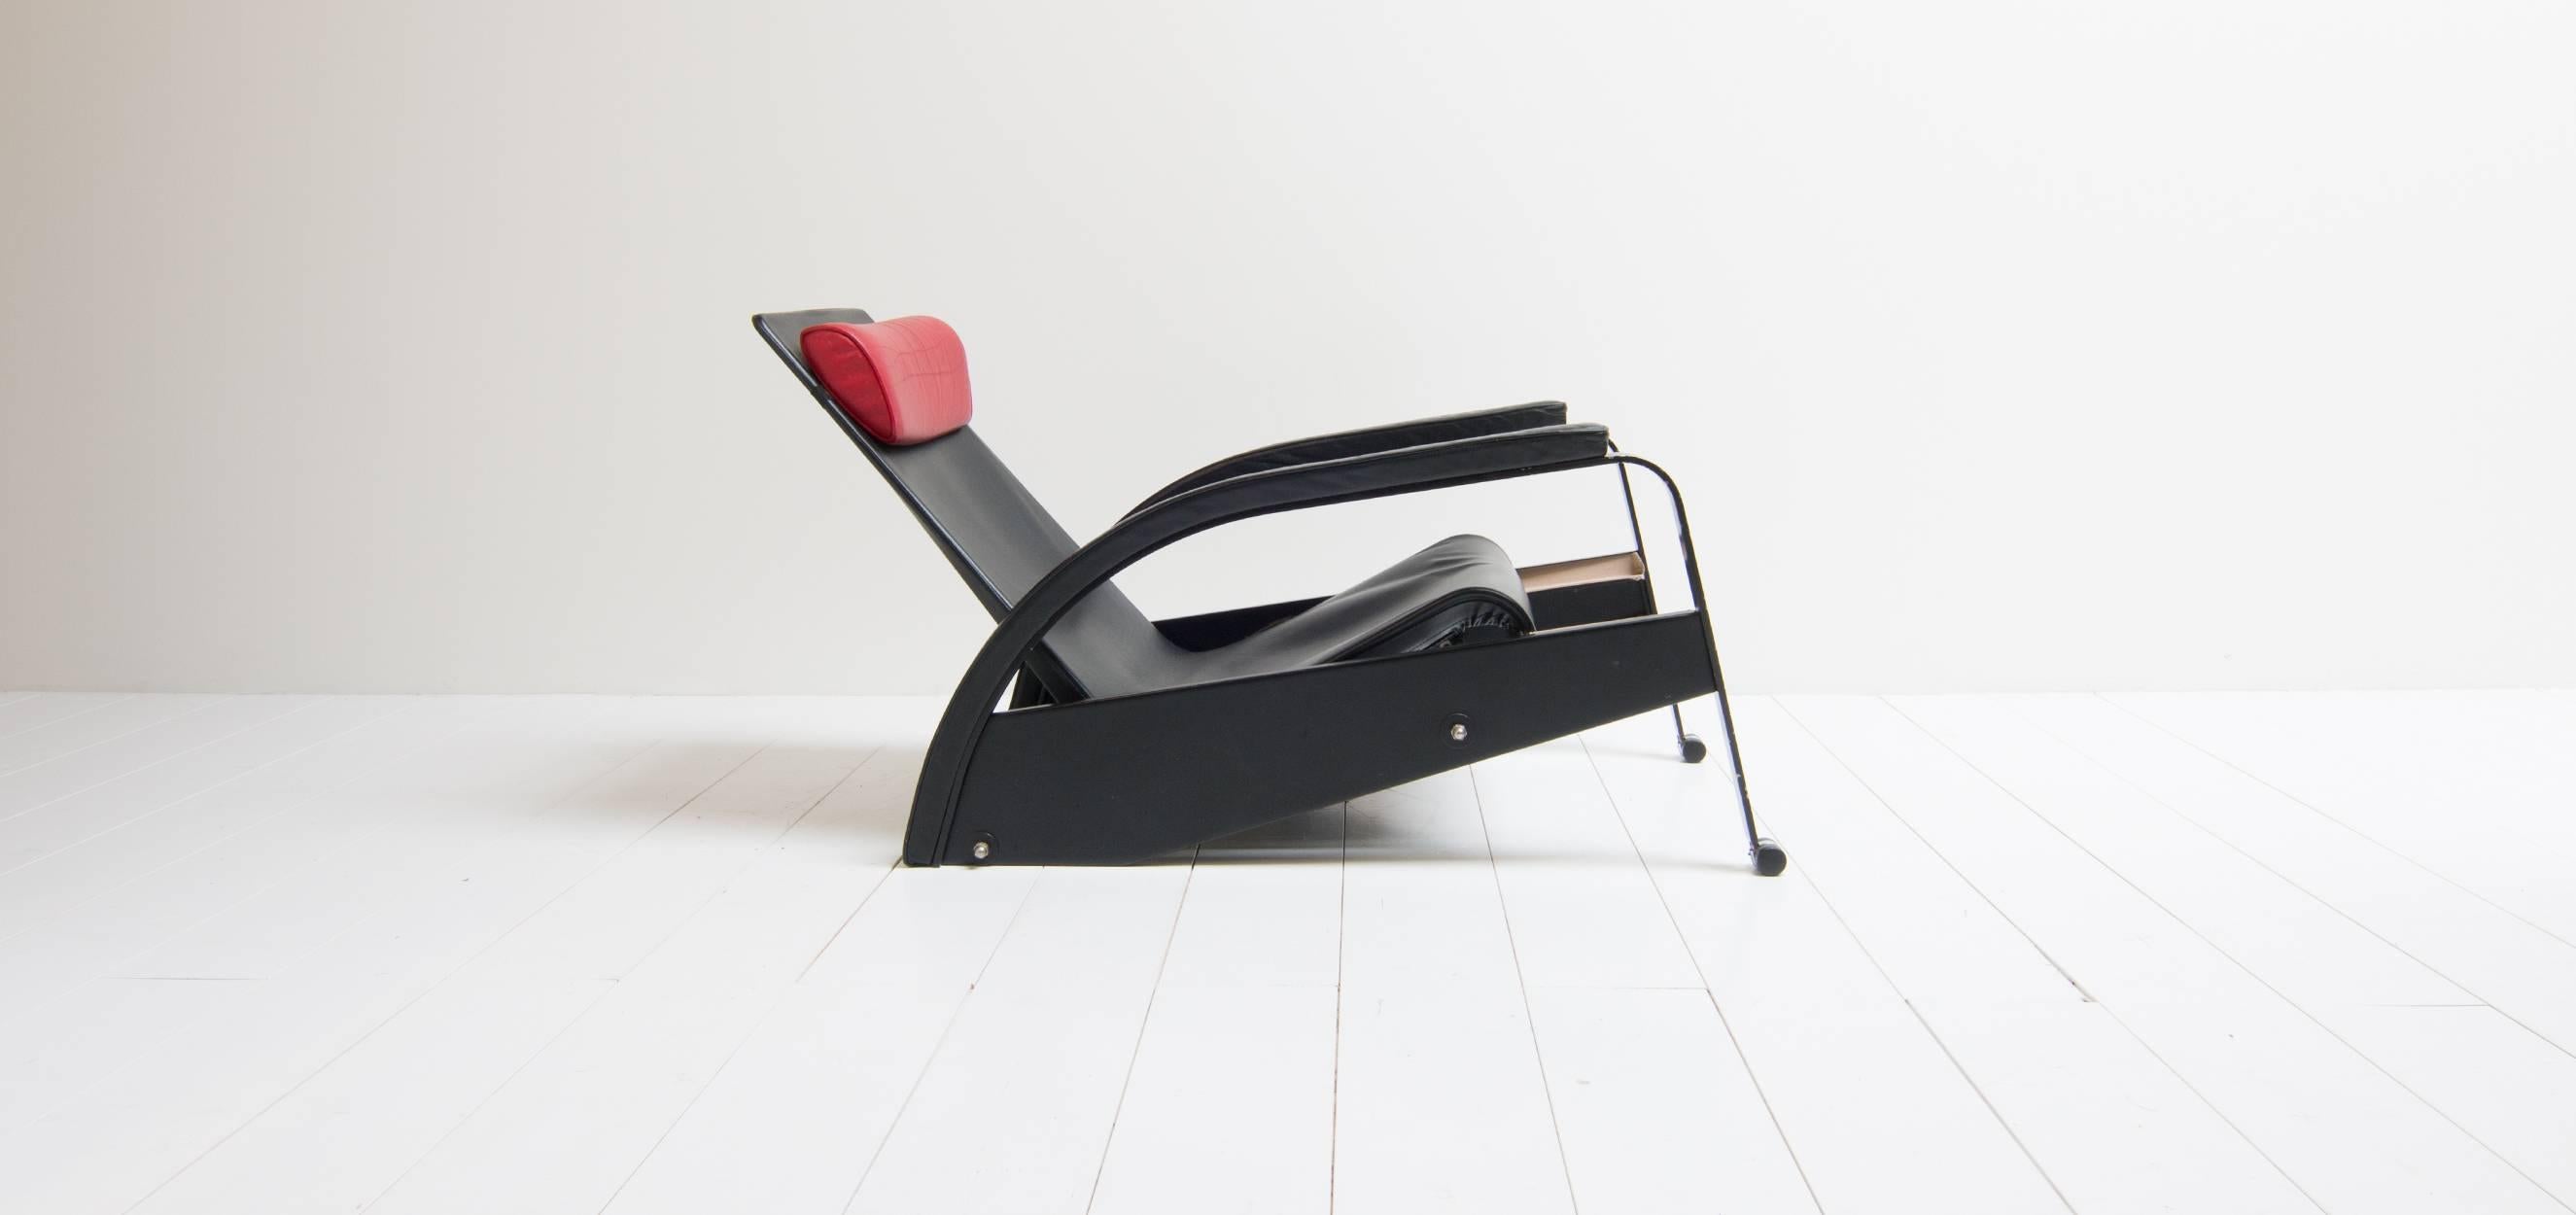 Jean Prouvé lounge chair named “Grand Repos” produced by the German company Tecta. This model is out of production. This Jean Prouvé lounge chair is called machine chair by many as well. Only 100 units of this lounge chair exist. This model was